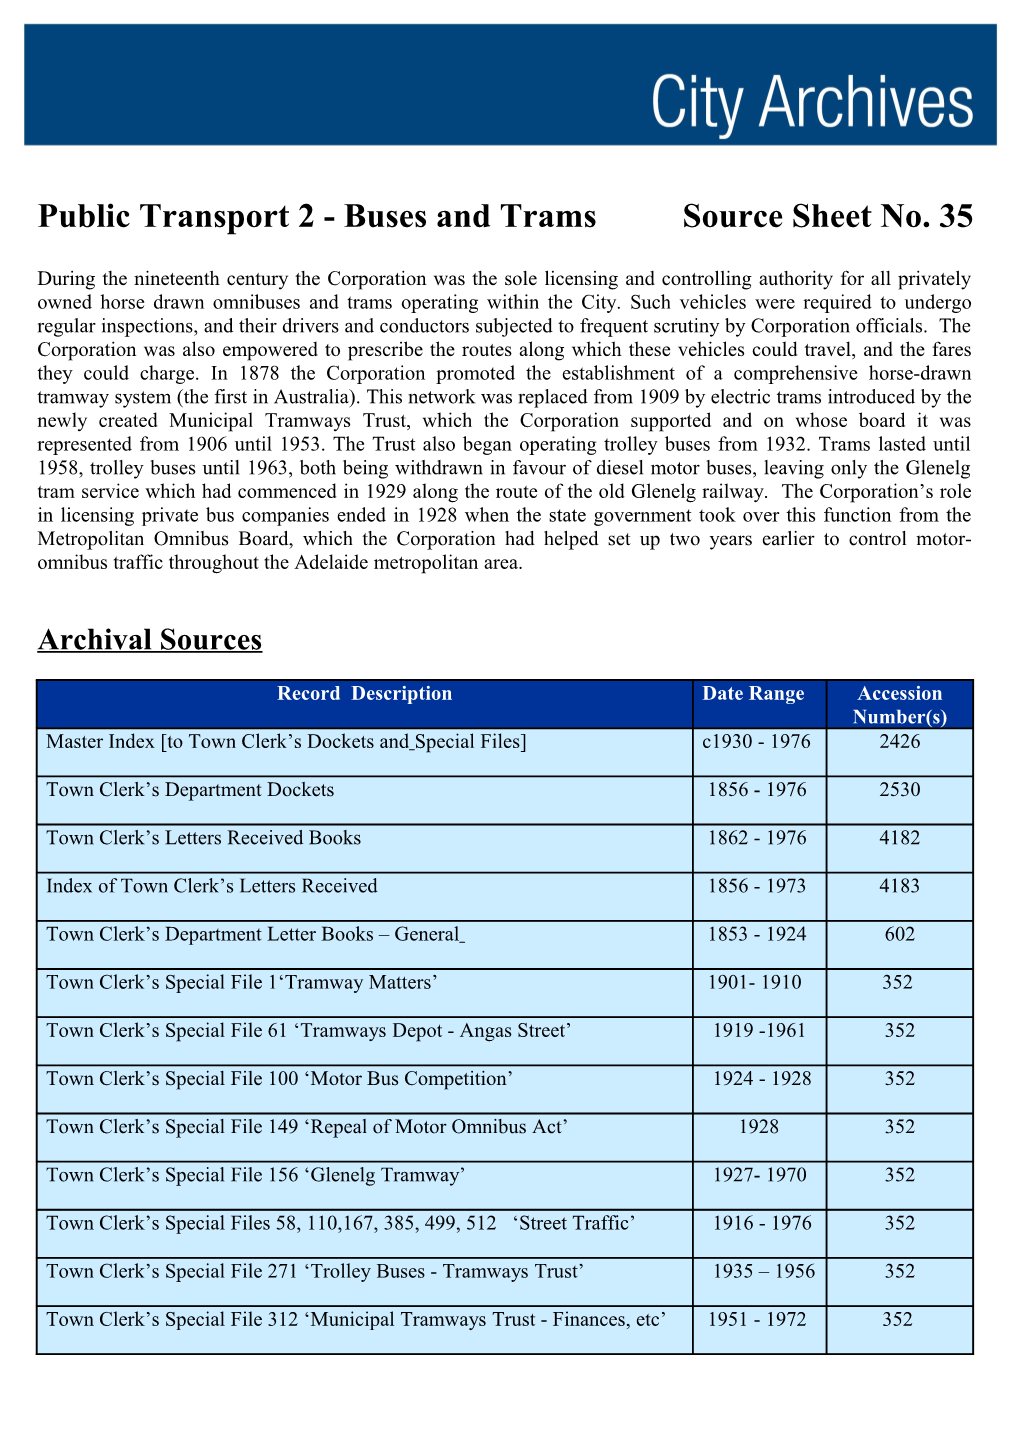 Public Transport 2 - Buses and Trams Source Sheet No. 35